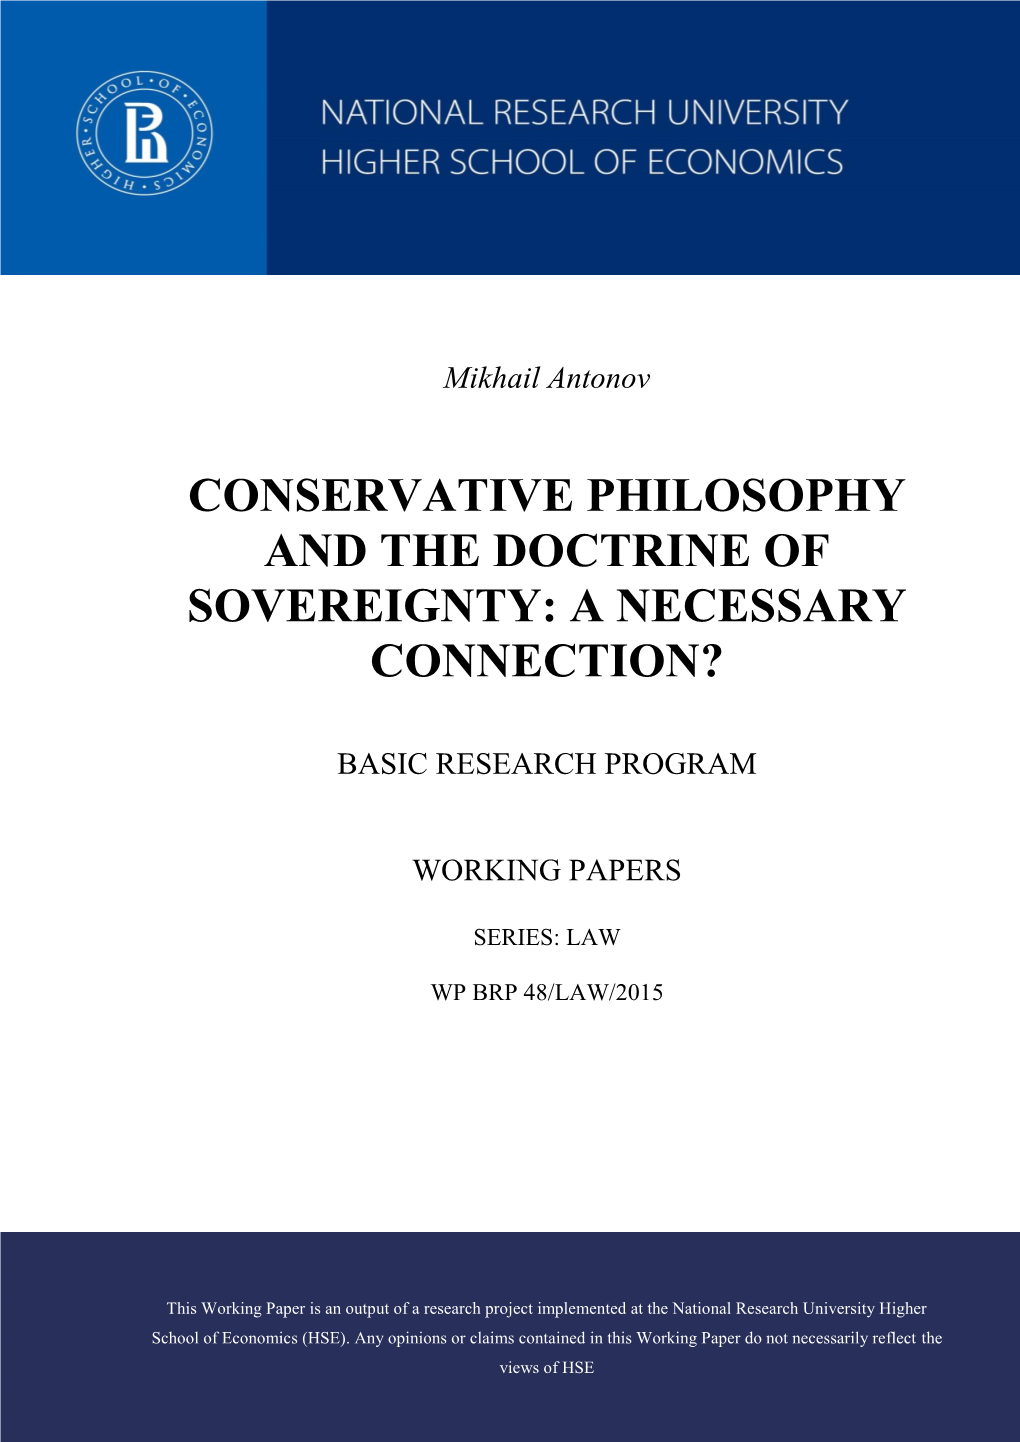 Conservative Philosophy and the Doctrine of Sovereignty: a Necessary Connection?